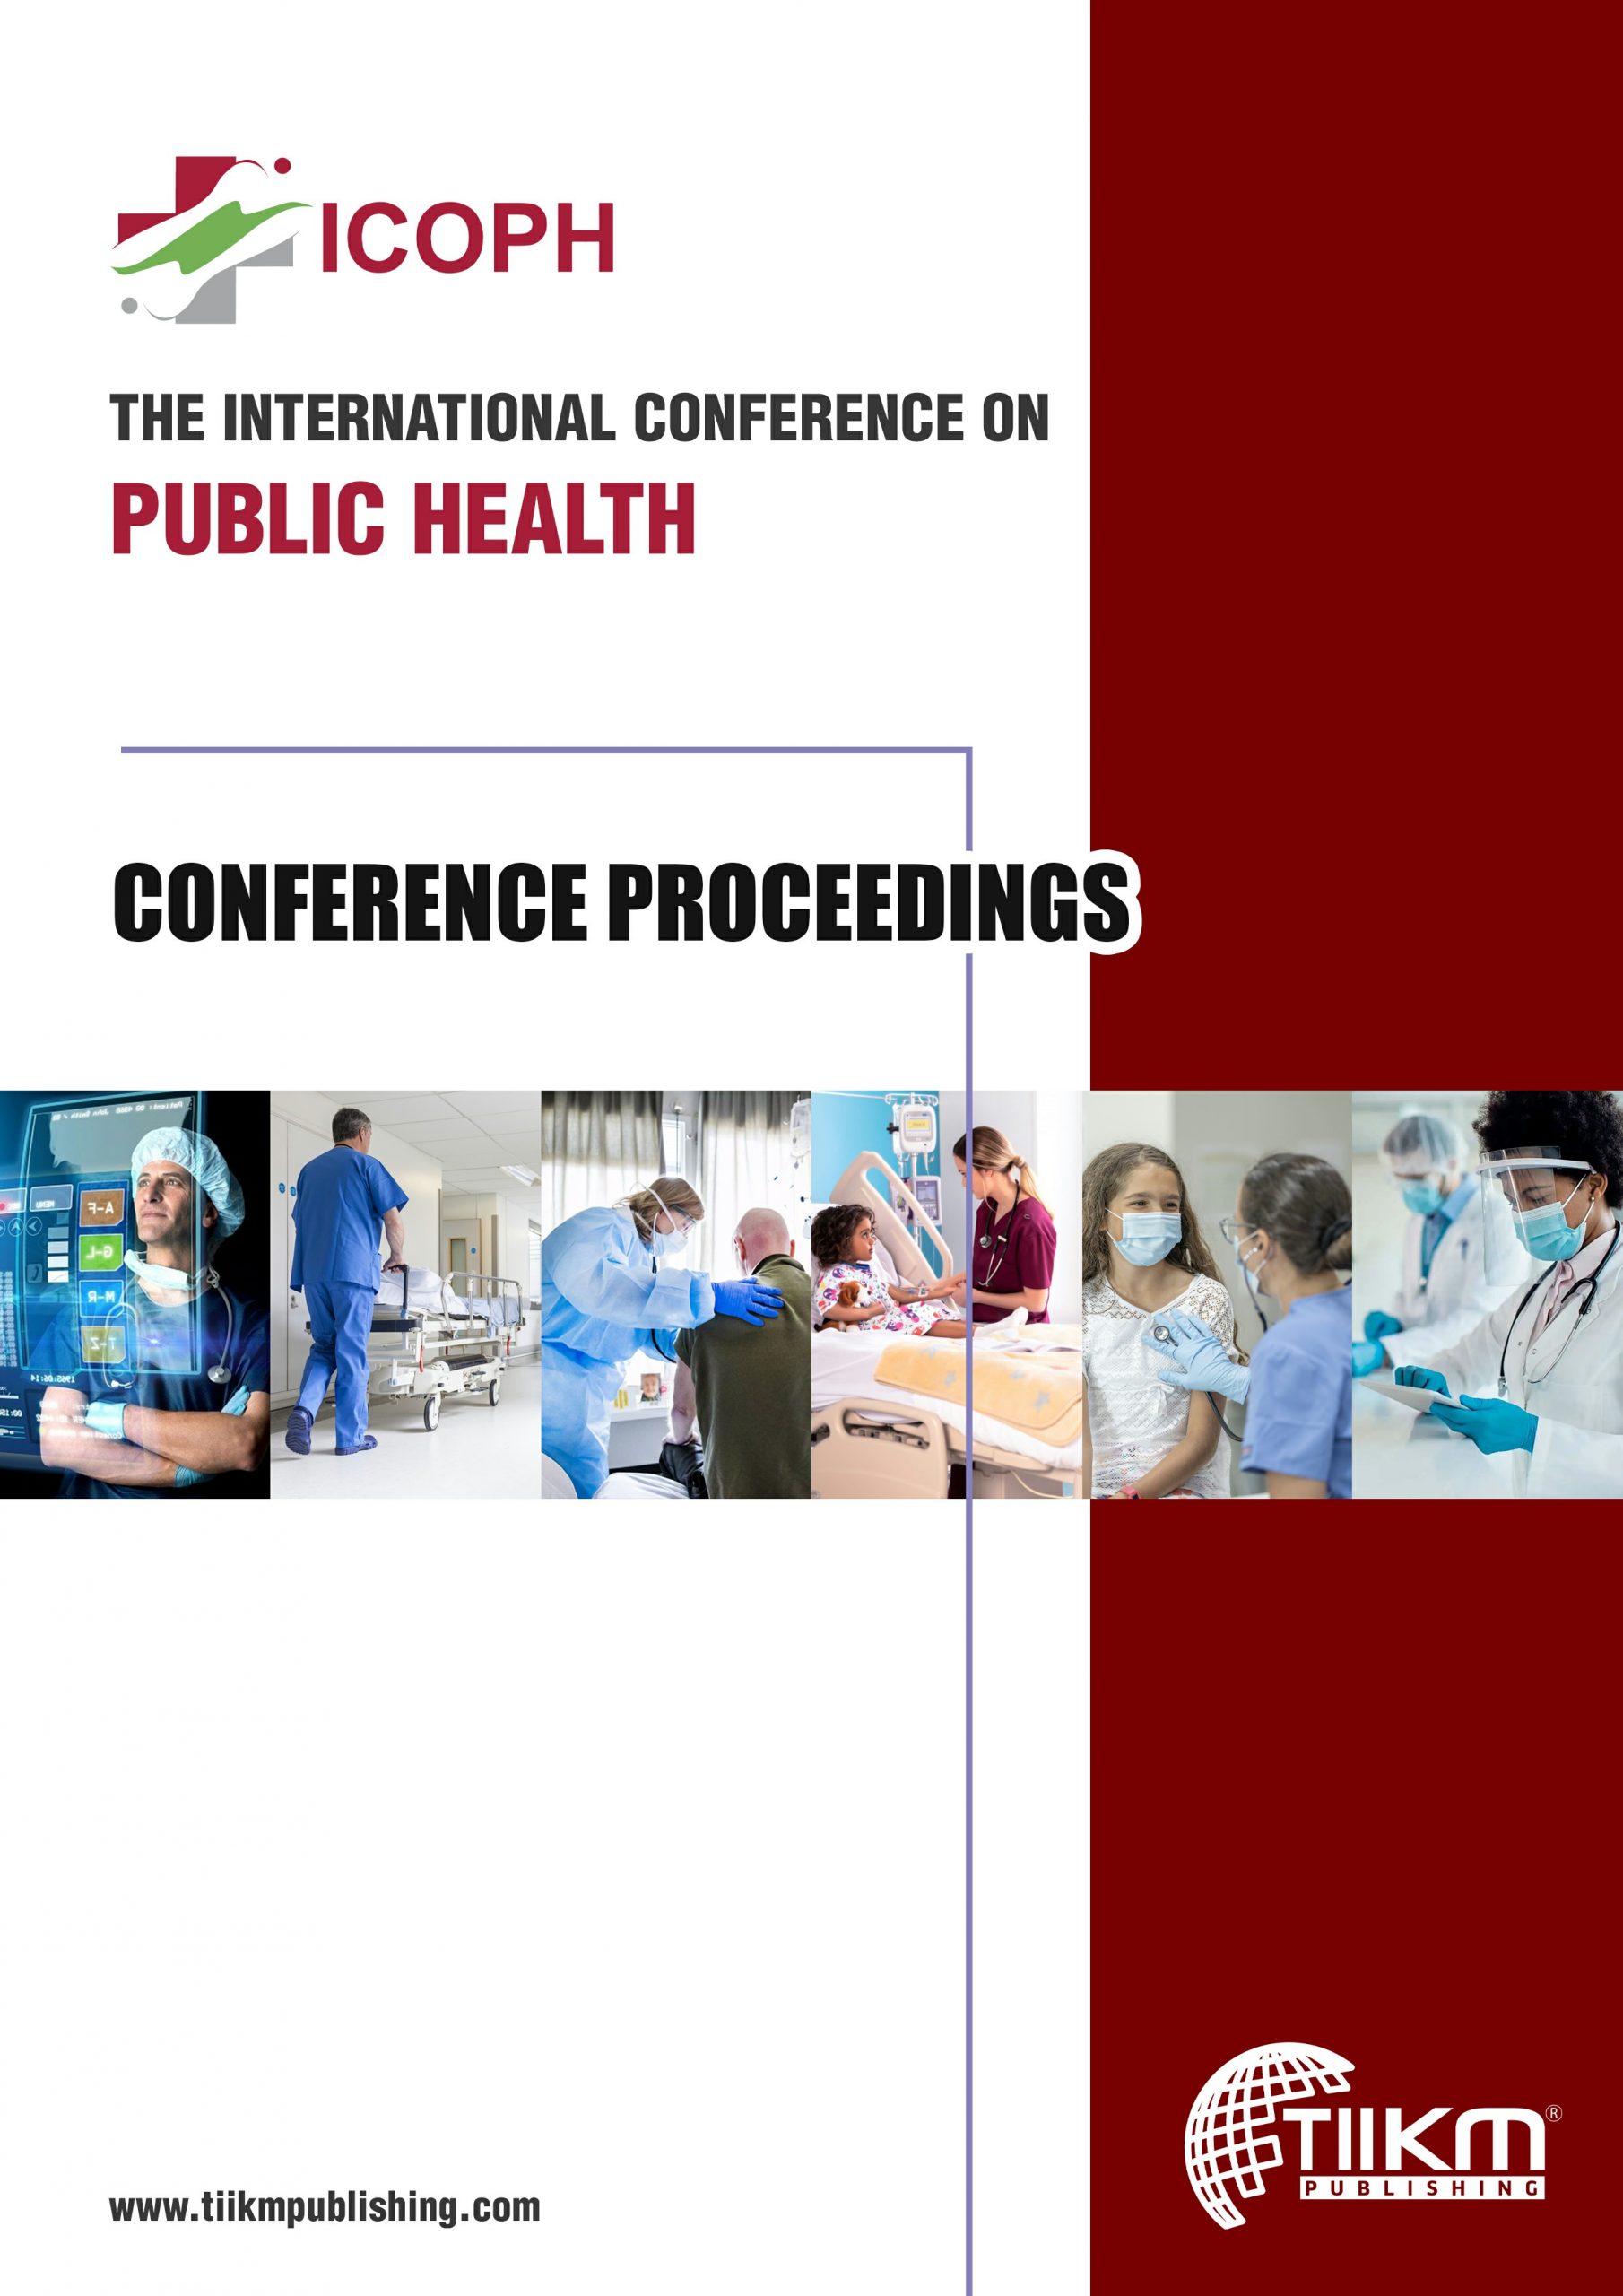 Conference Proceedings